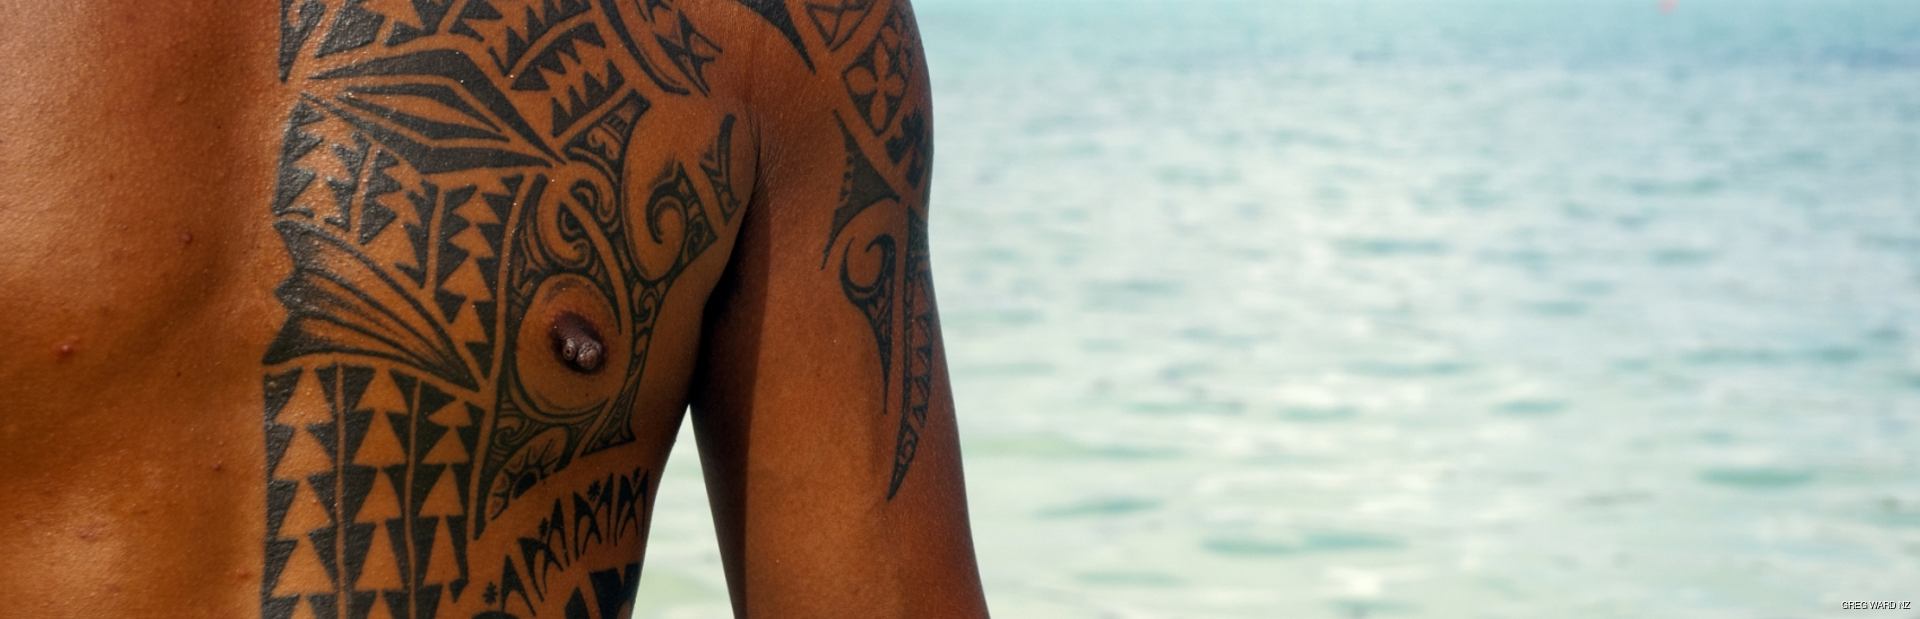 A man with a traditional Polynesian tattoos on his arm and chest